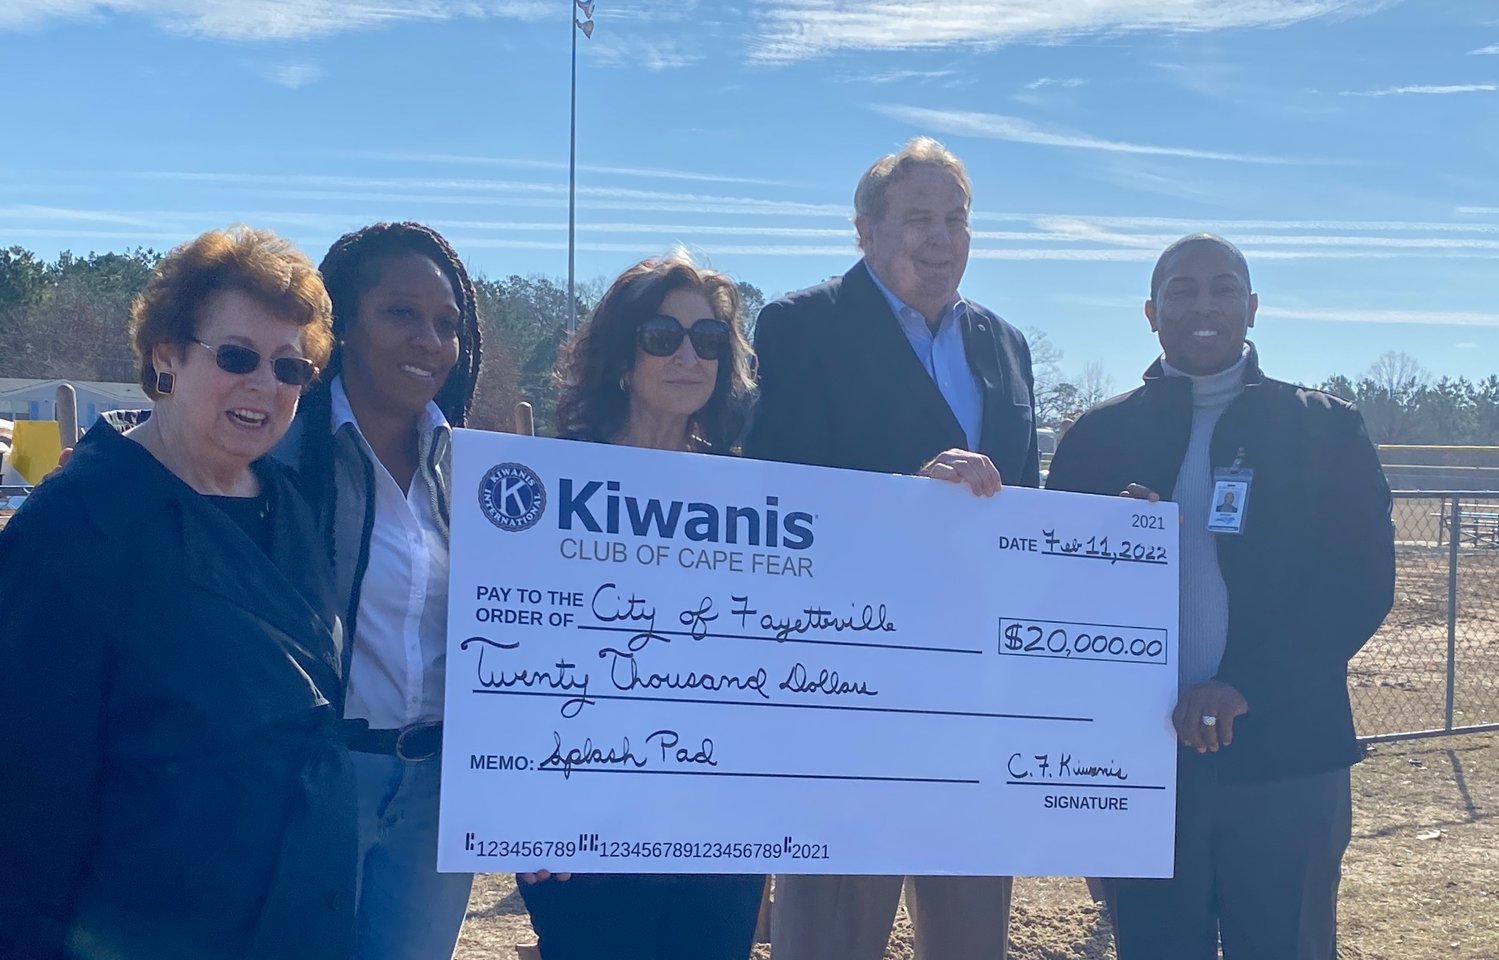 The Kiwanis Club of Cape Fear presents a $20,000 check to the city of Fayetteville for a splash pad at Lake Rim Recreation Center on Friday.